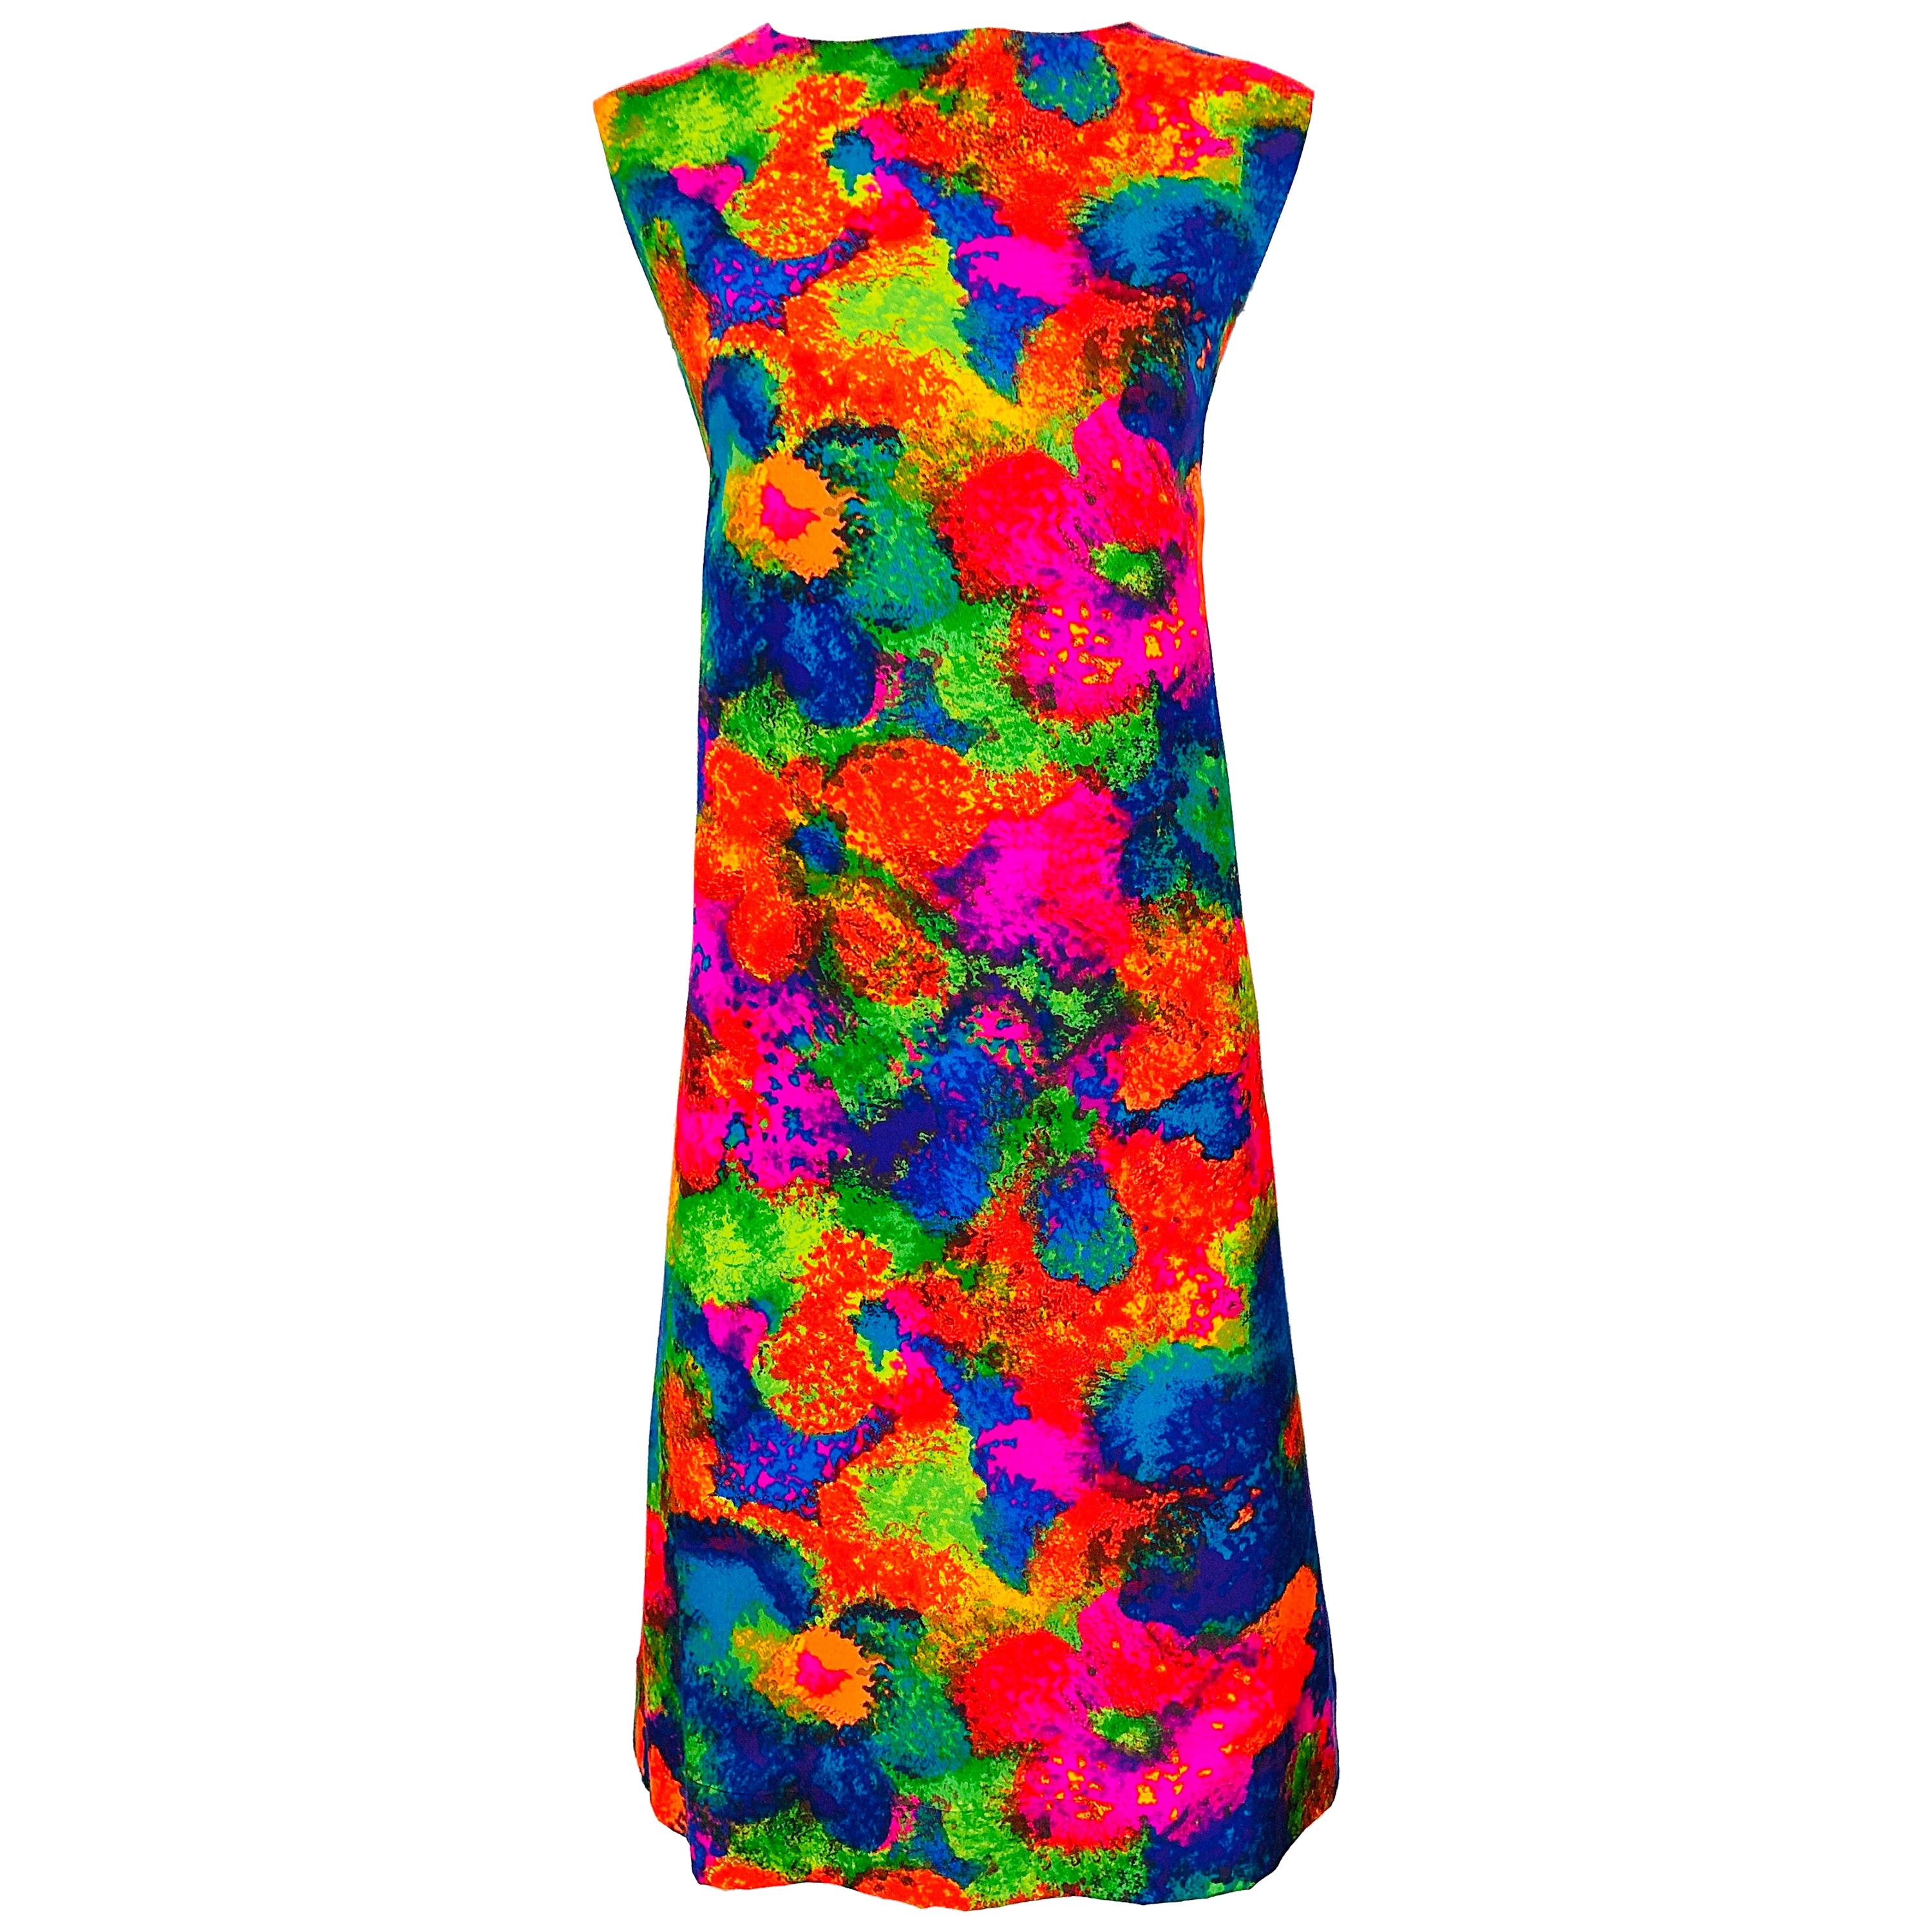 Chic 1960s Larger Size Neon Abstract Flower Print Vintage 60s Cotton Shift Dress